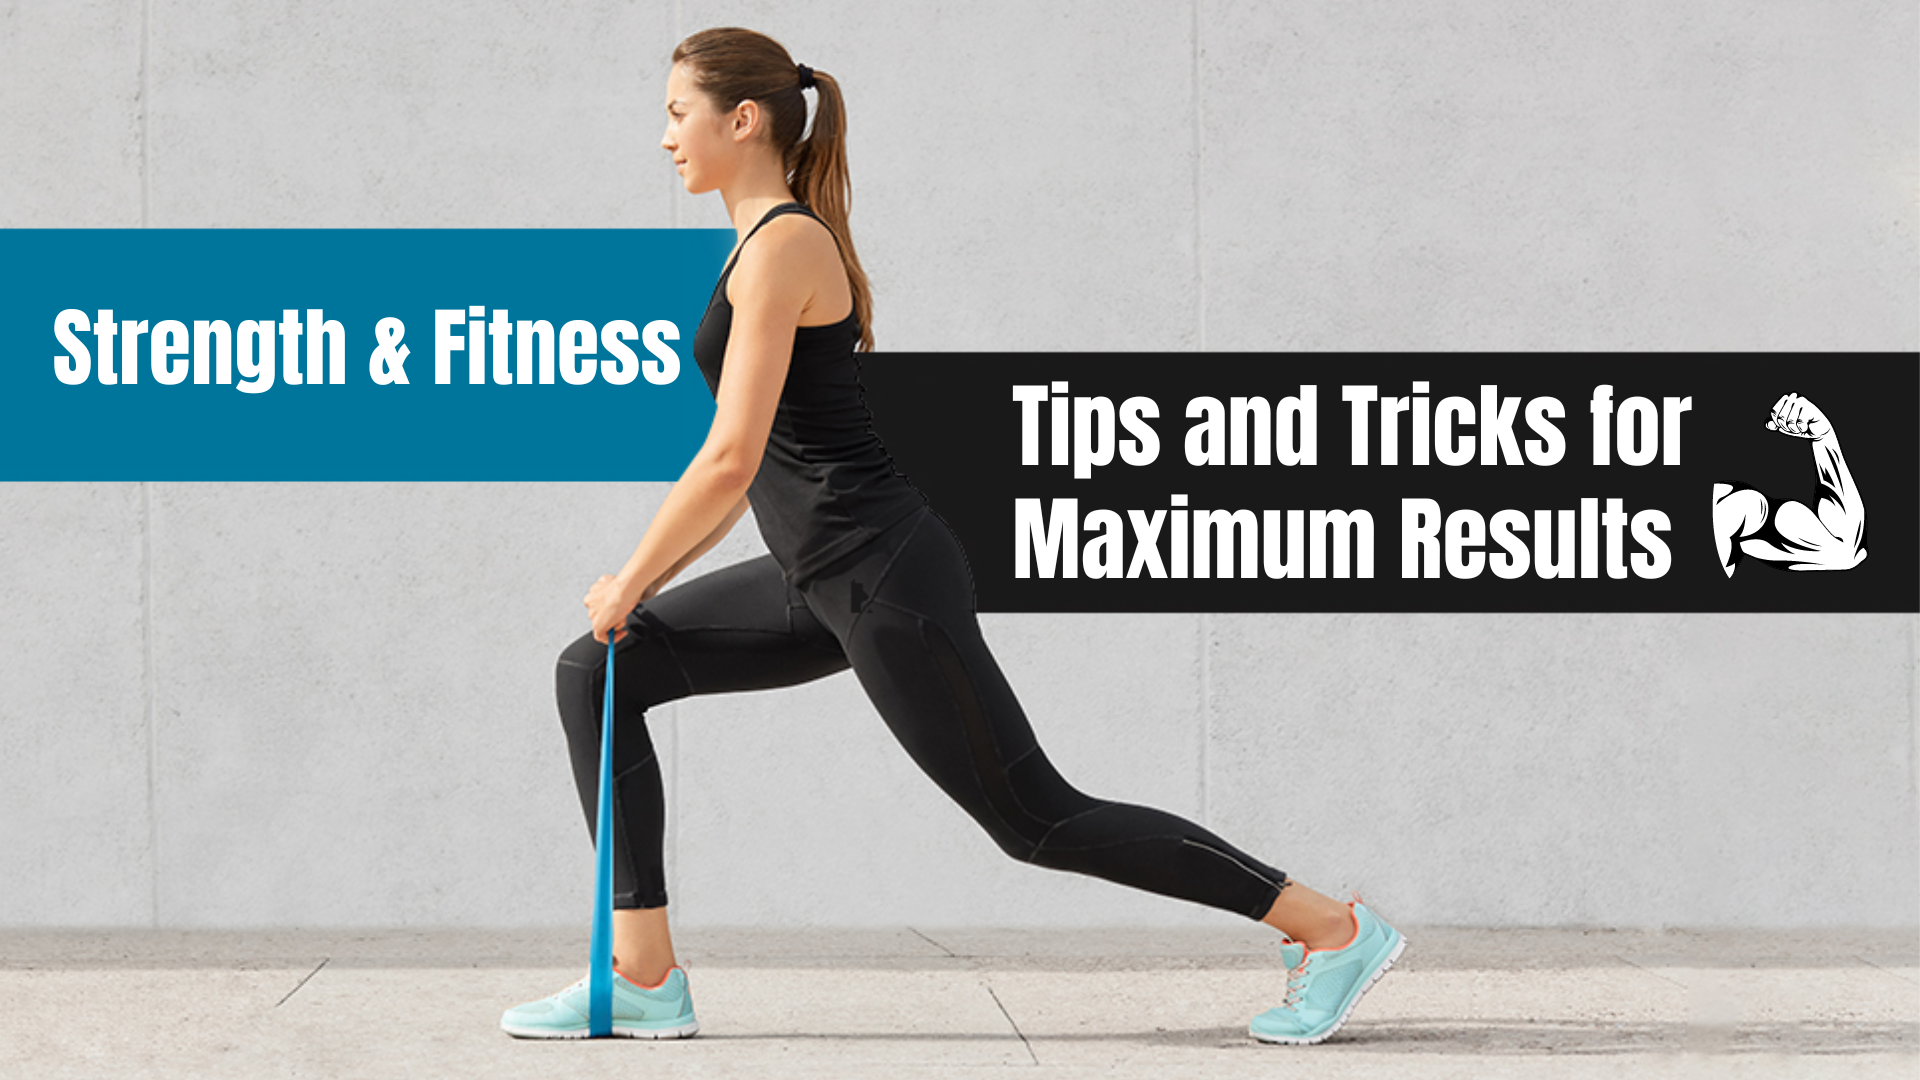 Train Strength & Fitness: Tips and Tricks for Maximum Results